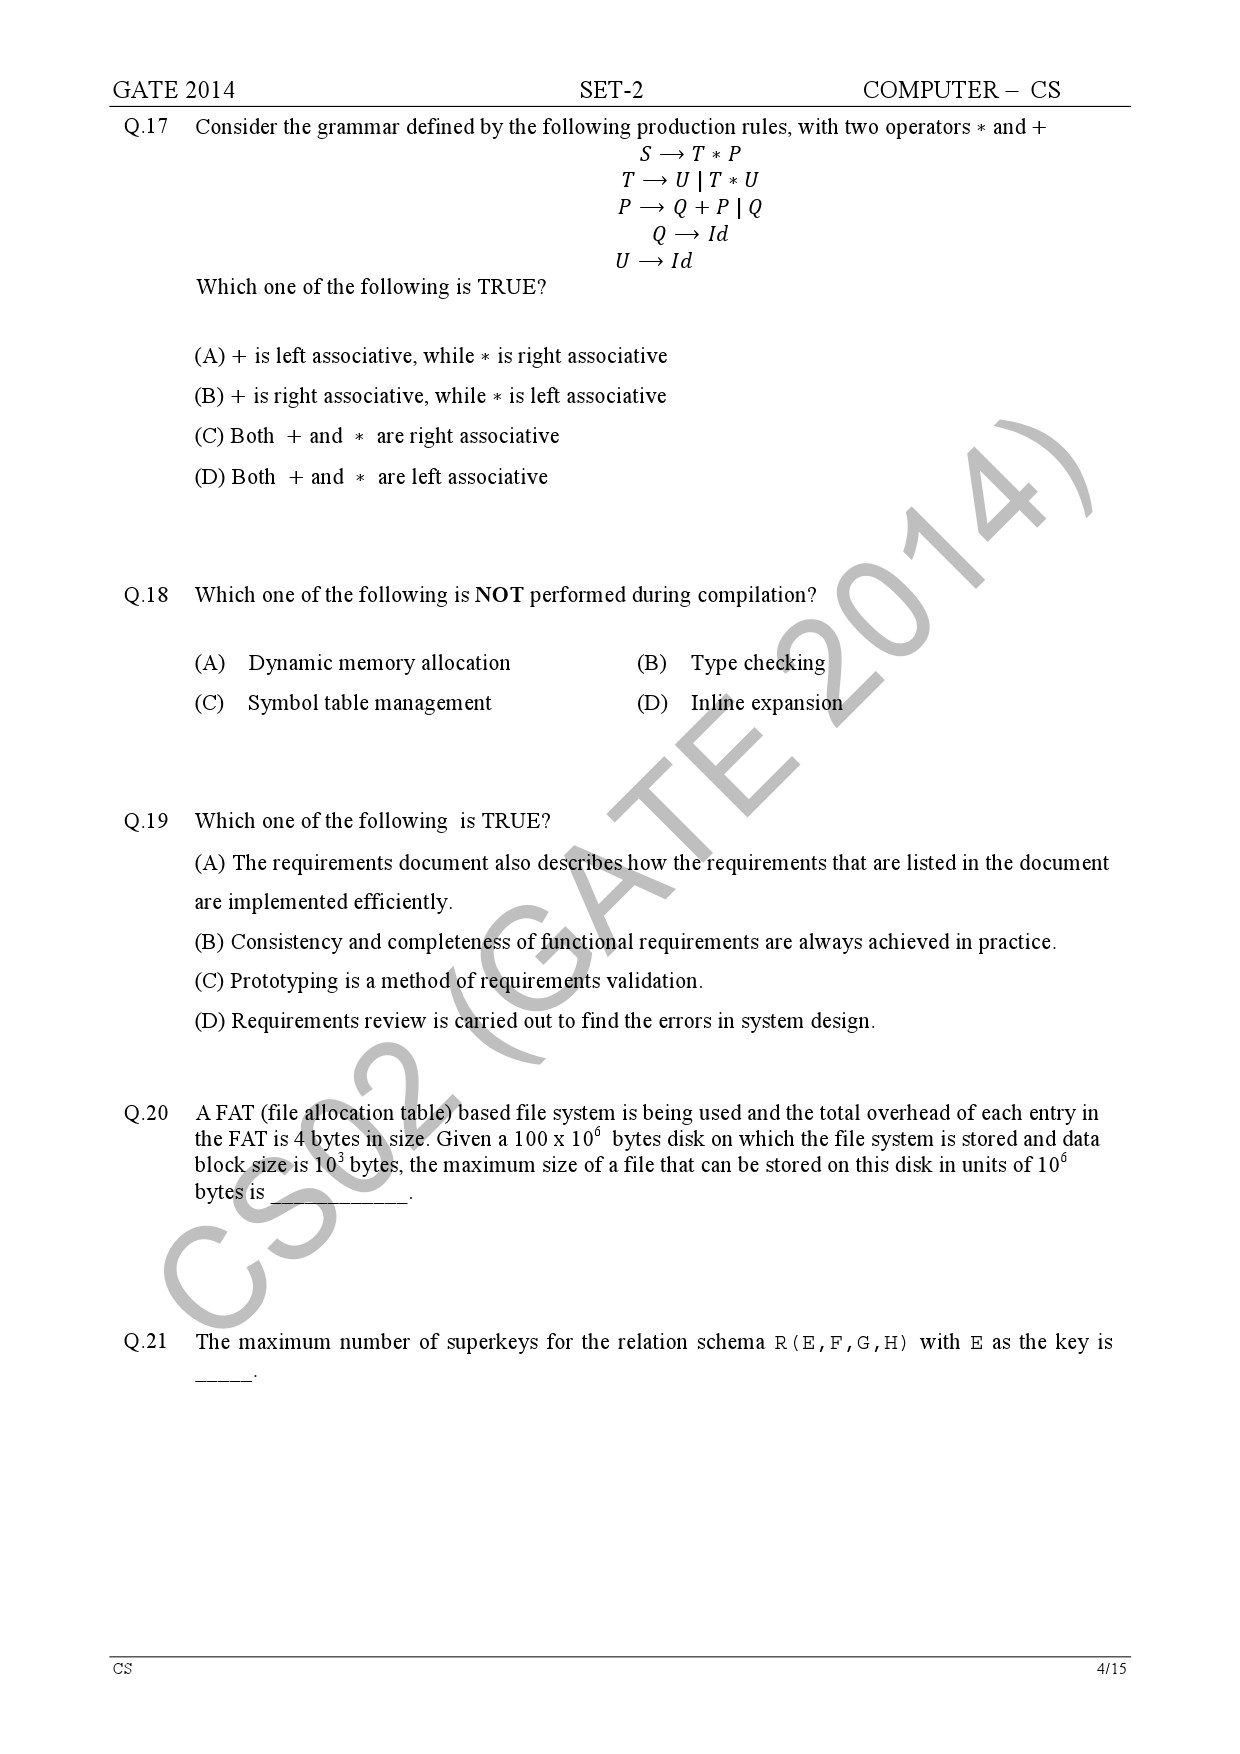 GATE Exam Question Paper 2014 Computer Science and Information Technology Set 2 10